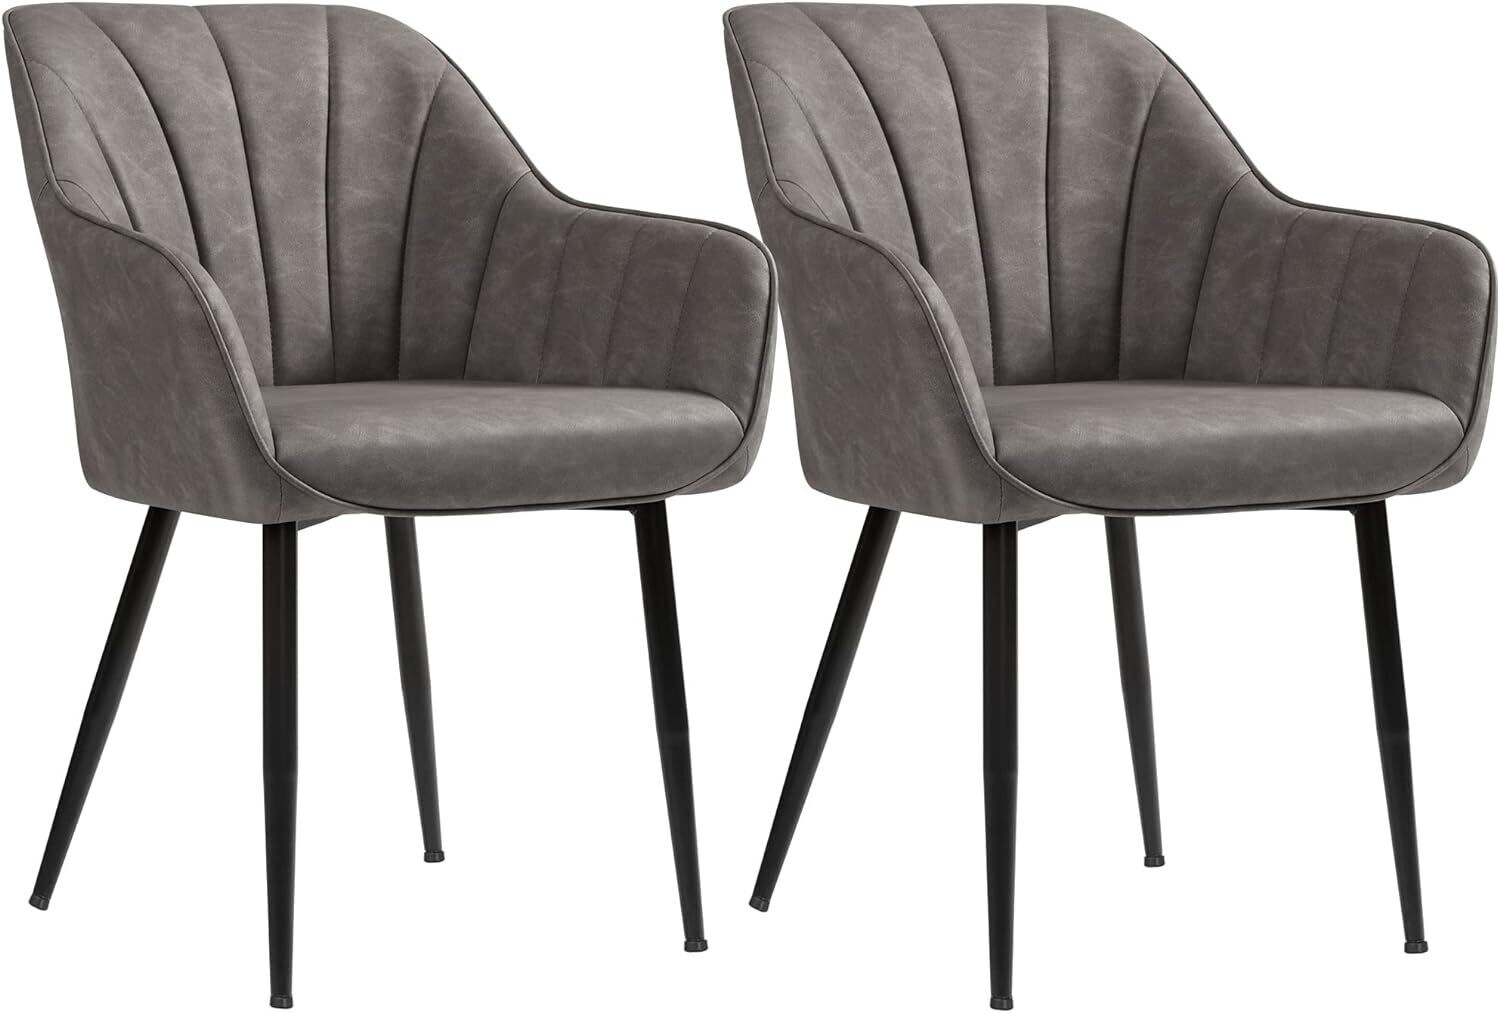 2 set of Dining Room Chairs, Lounge Chairs, with Armrests, PU Cover, Maximum Load 110 kg, Metal Legs, for Dining Room, Kitchen, Living Room, Bedroom